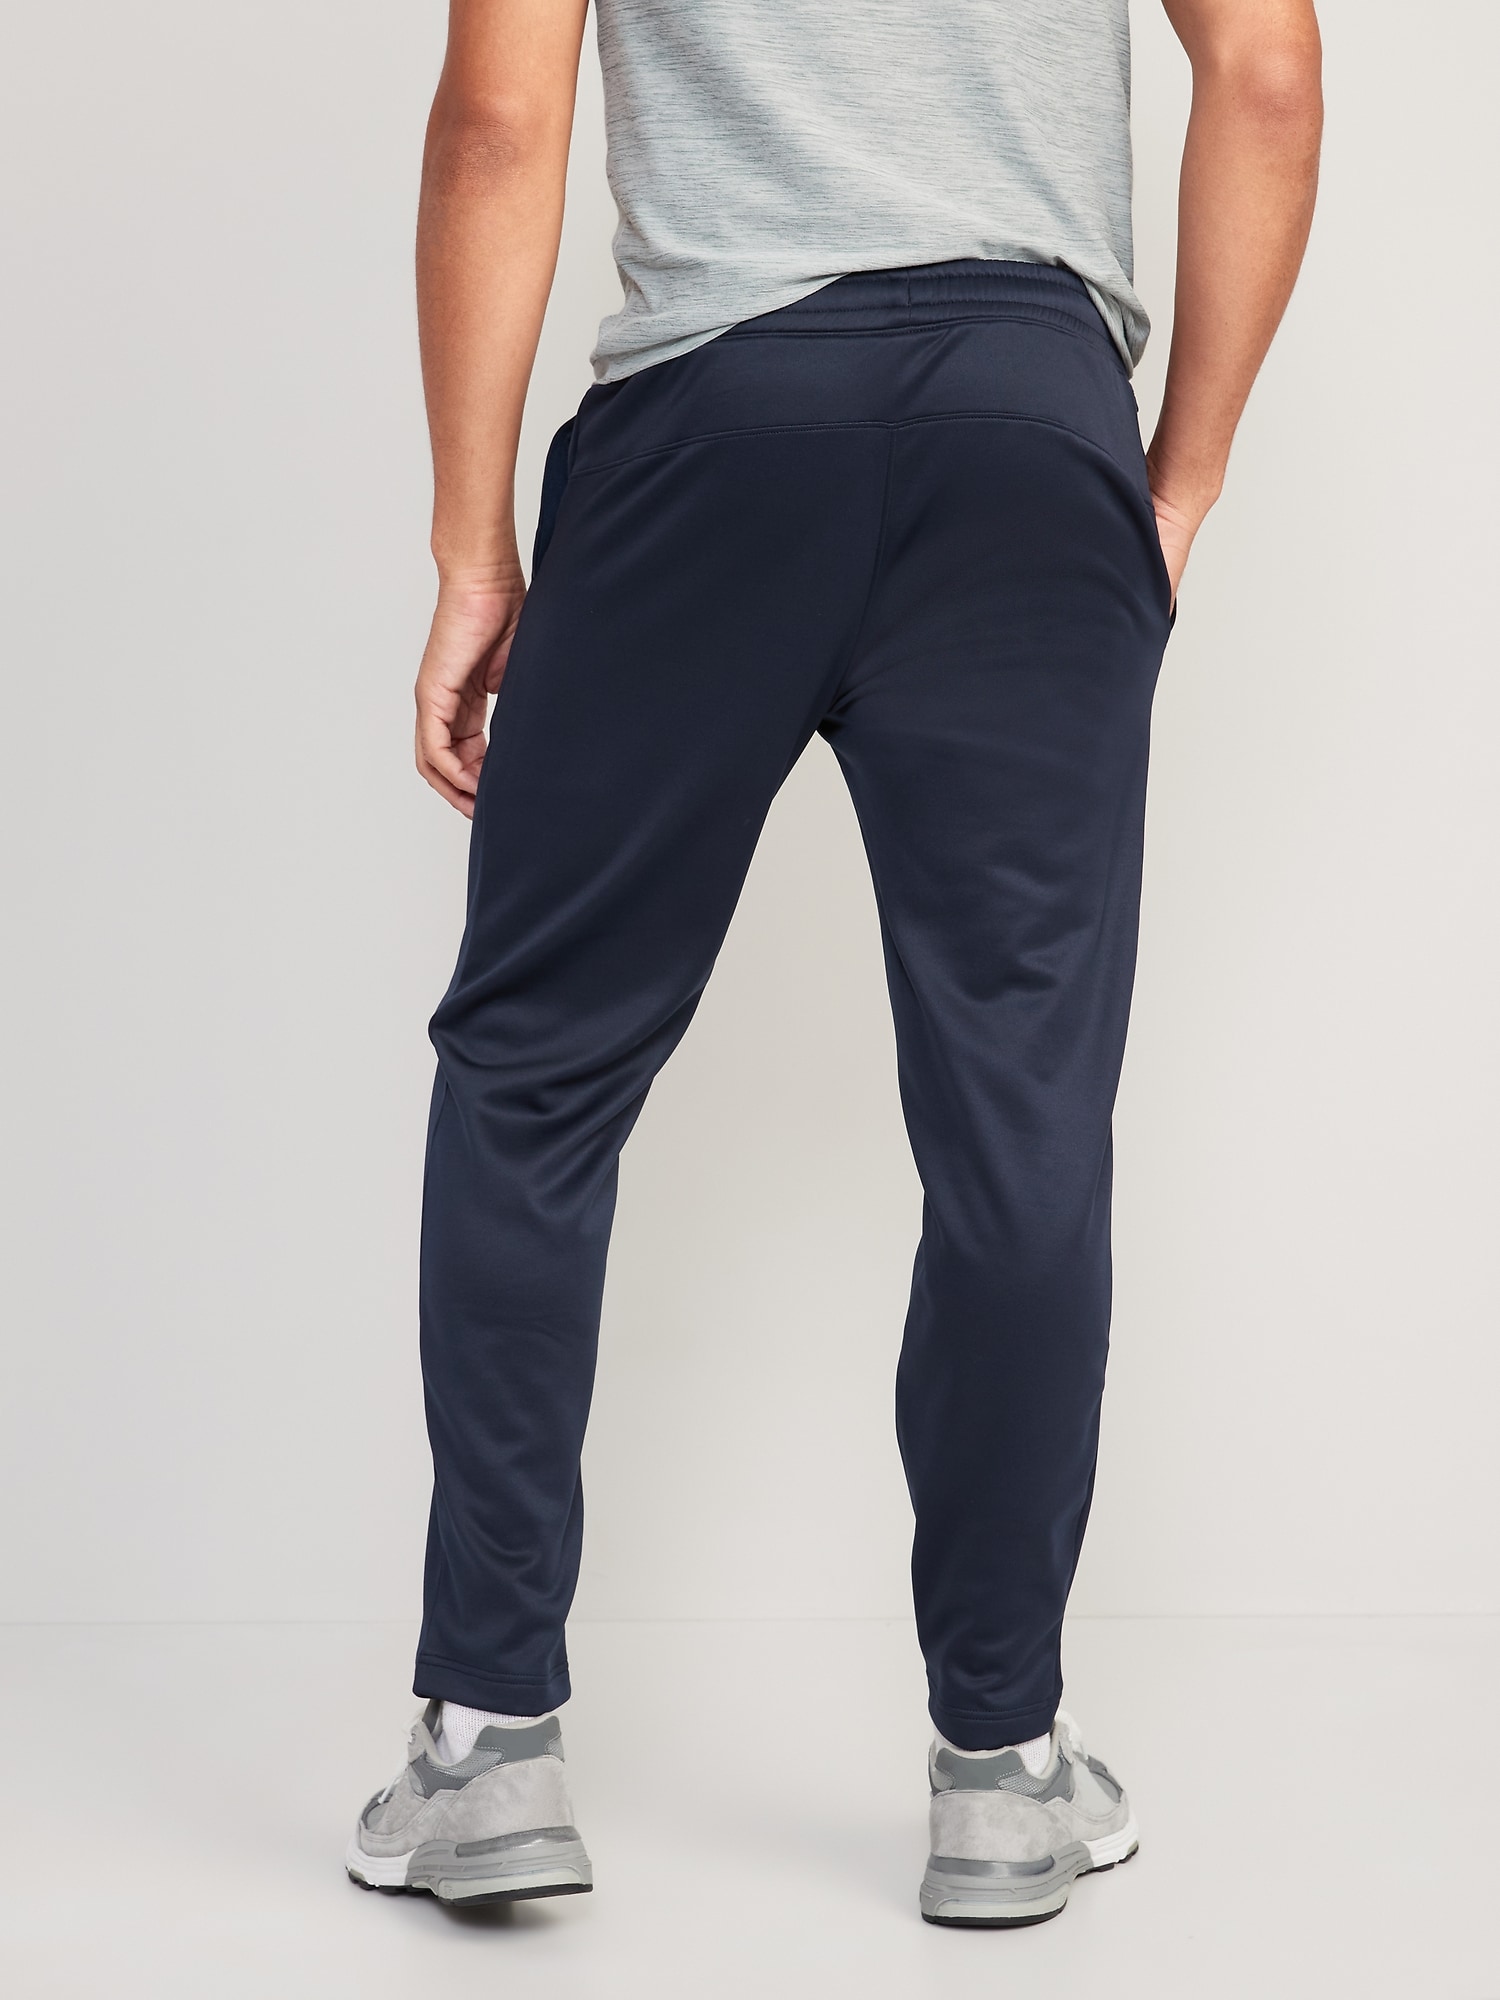 Go-Dry Tapered Performance Sweatpants | Old Navy